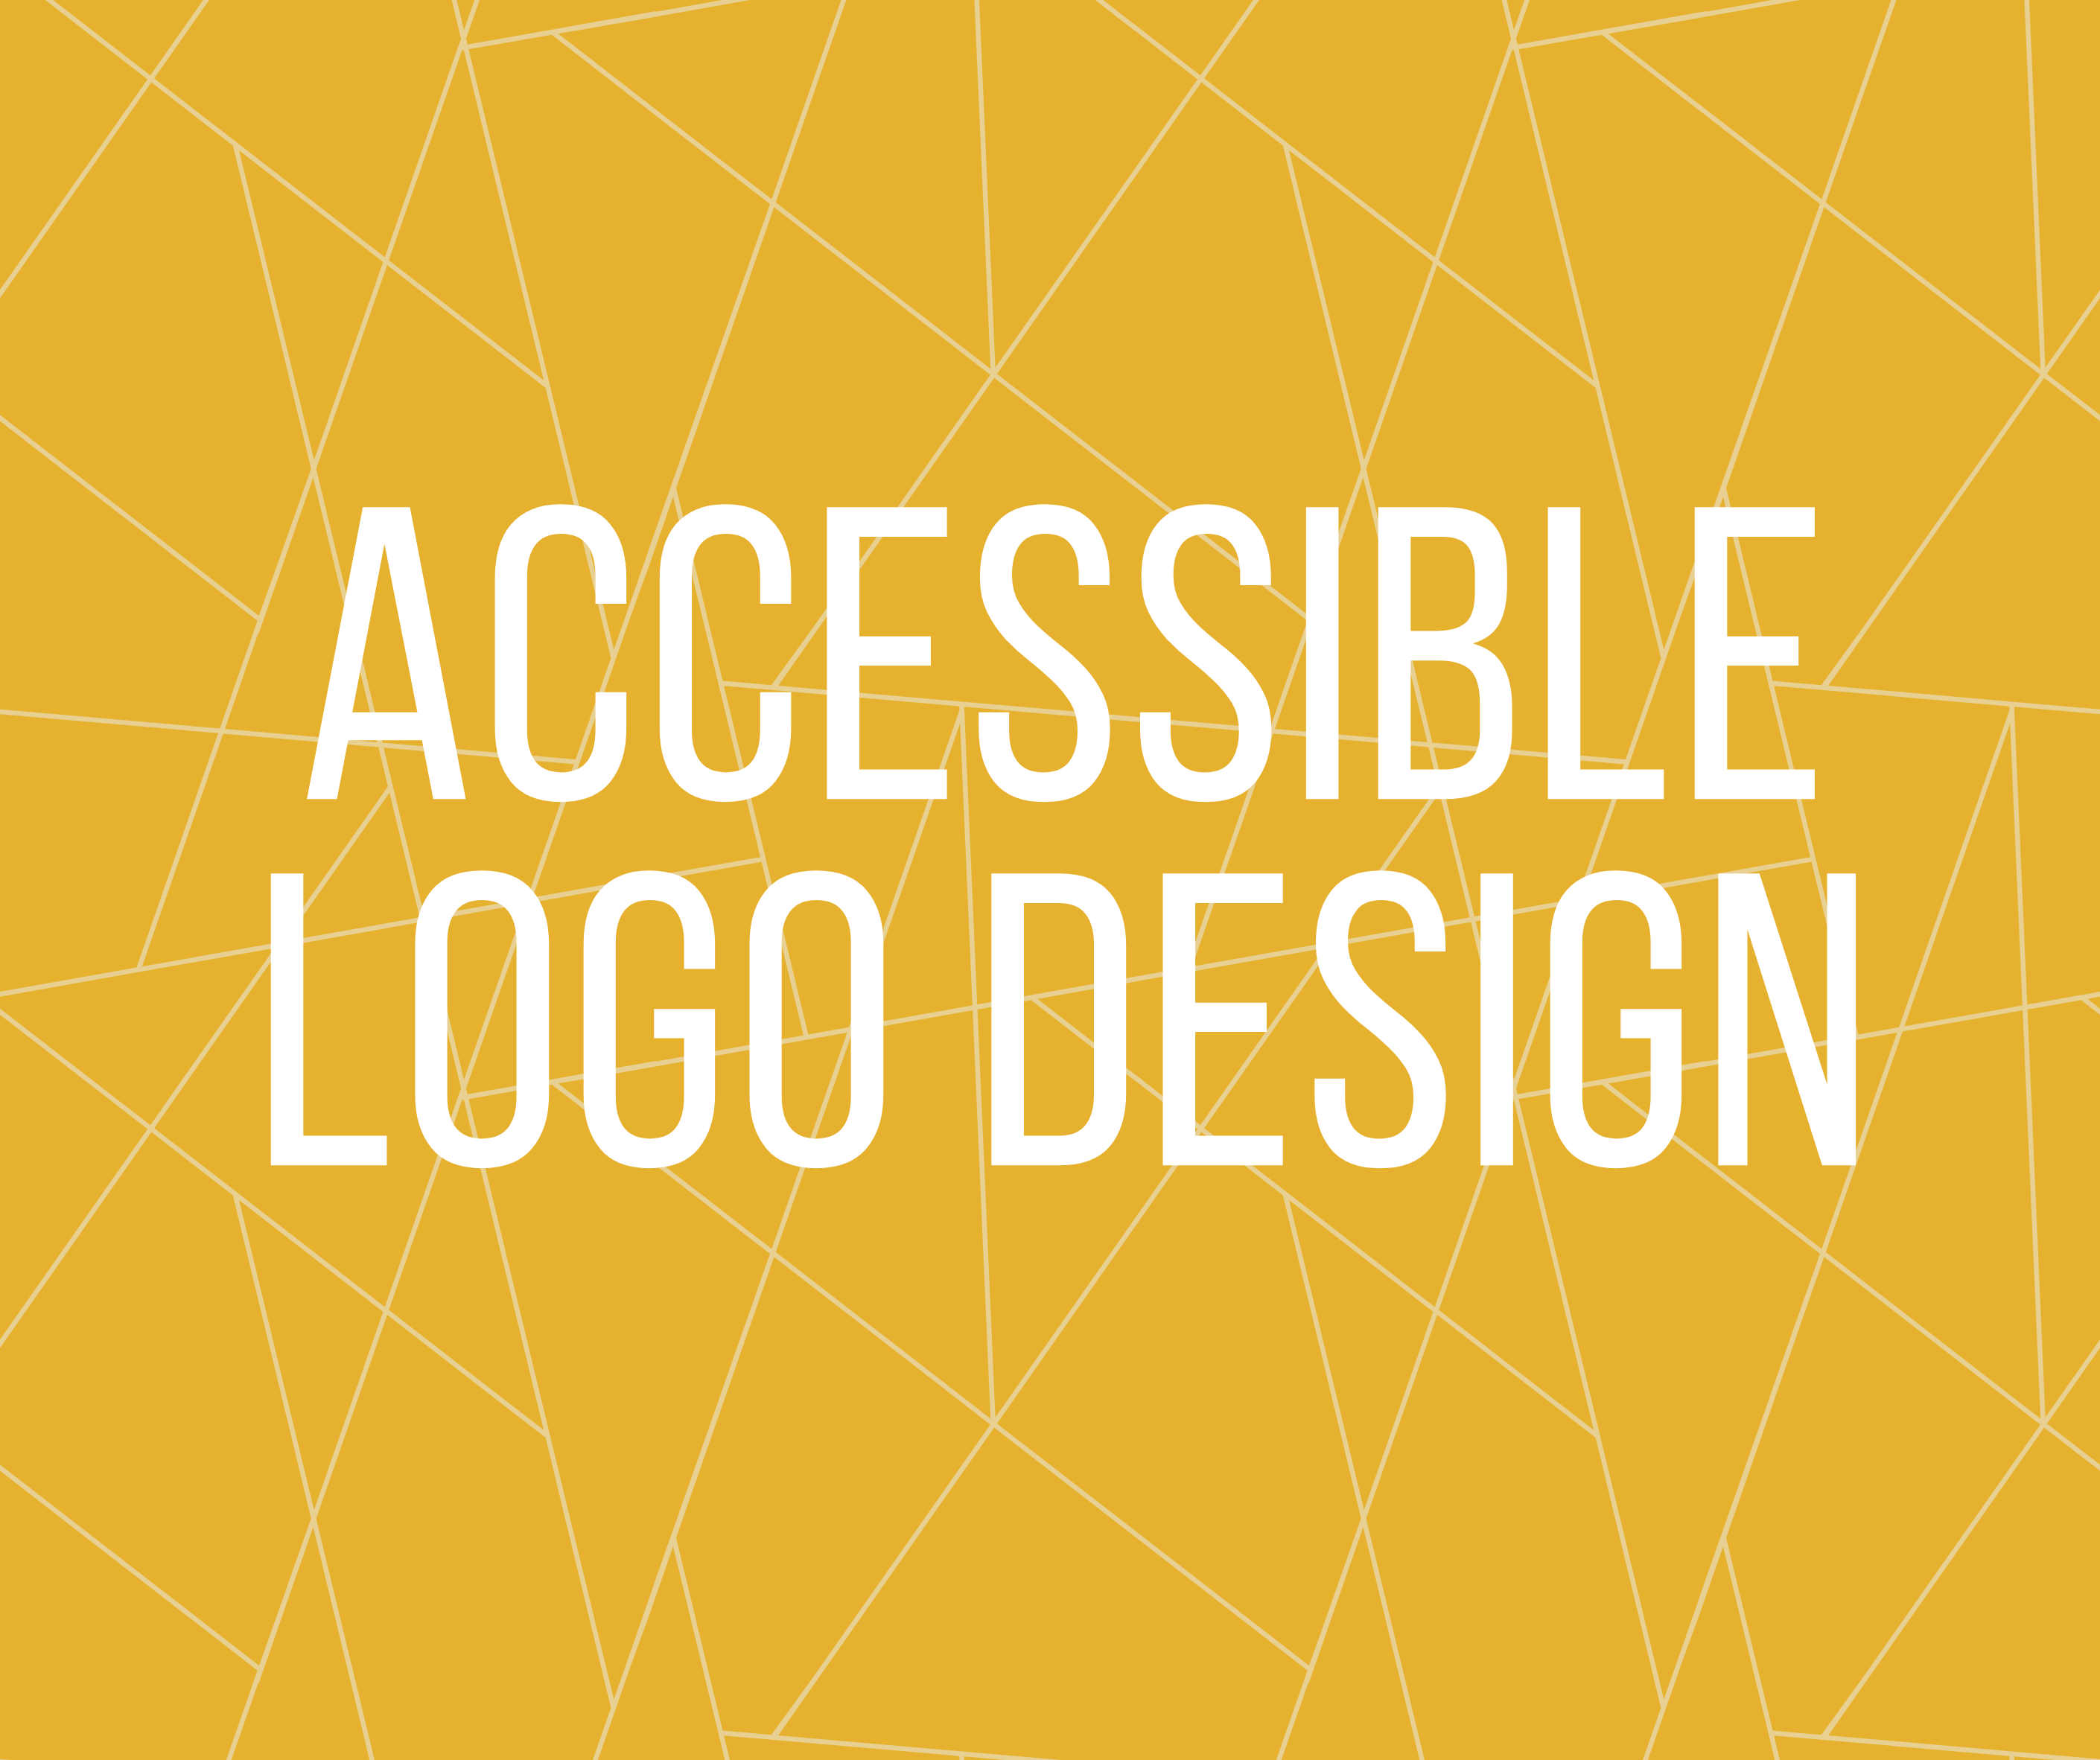 How to Design an Accessible Logo